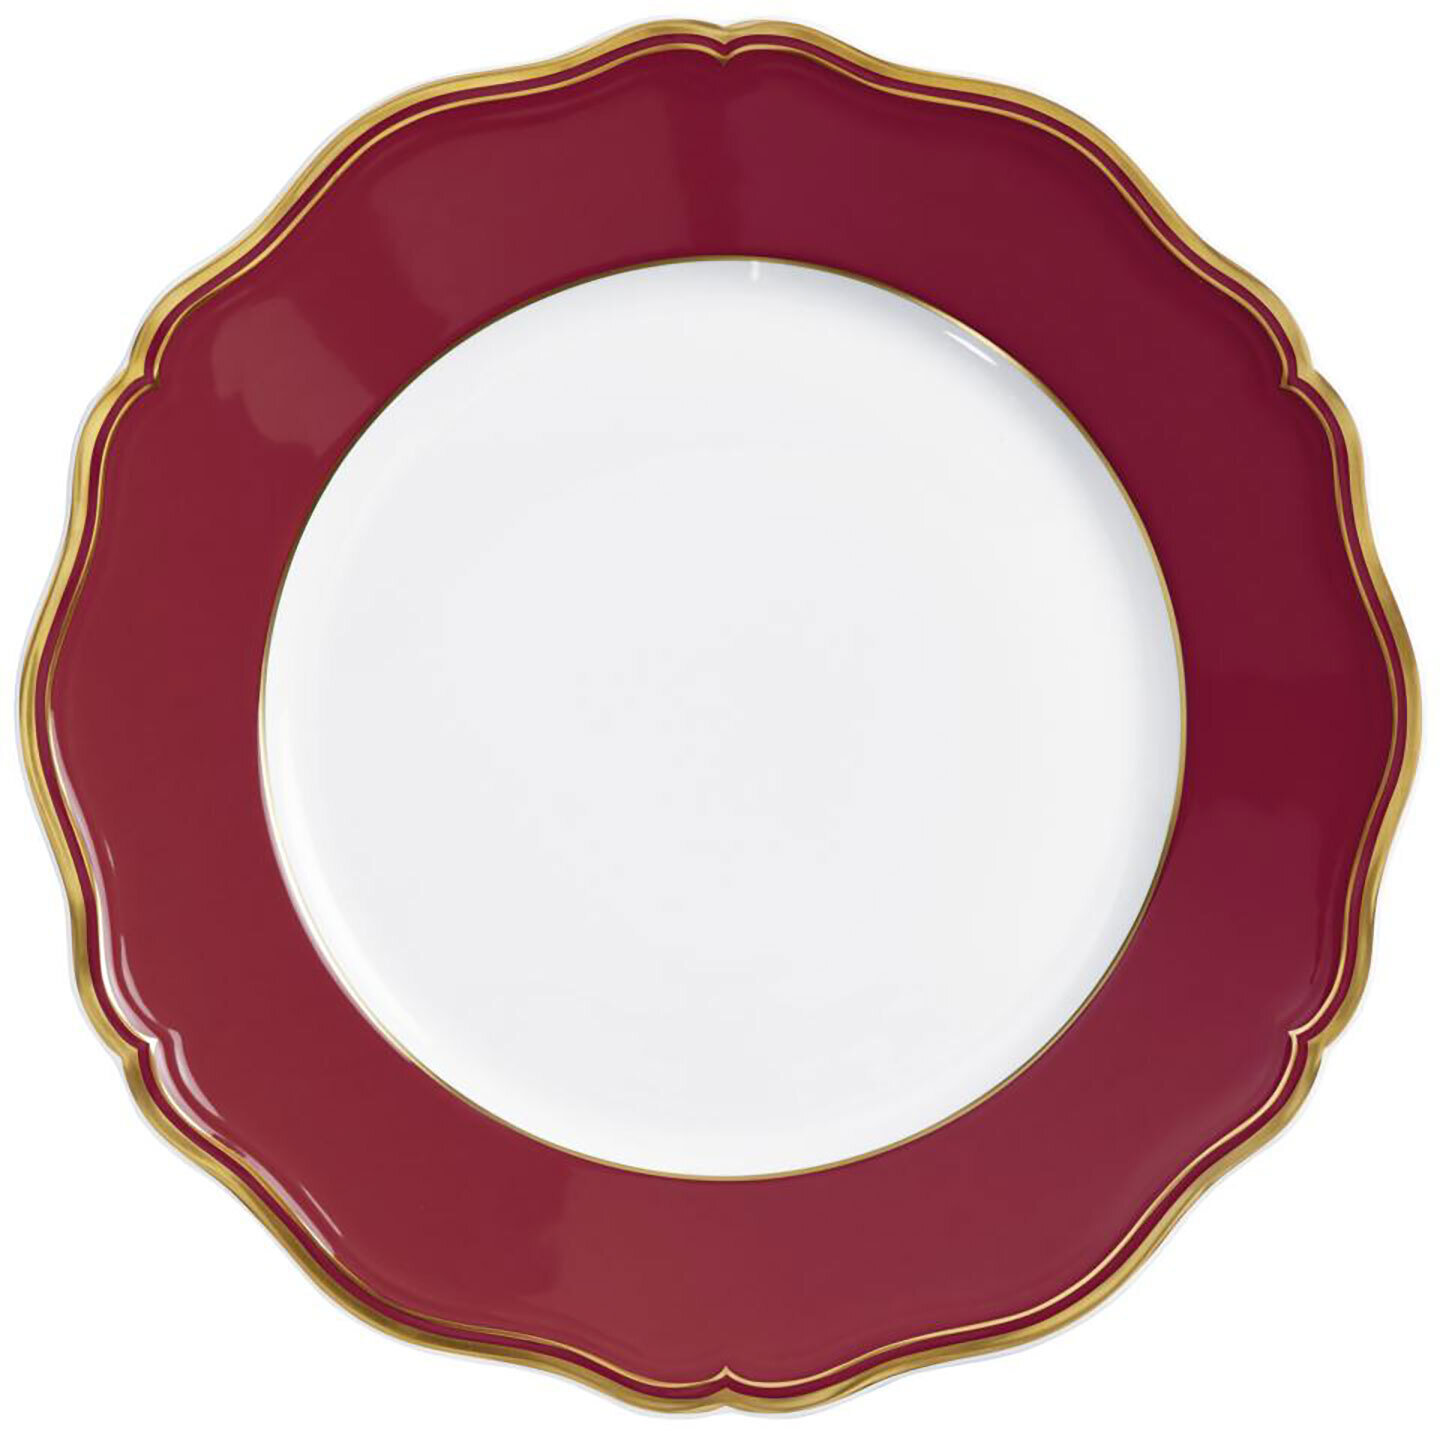 Raynaud Limoges Mazurka Or Red Dinner Plate 10.6 Inch 0870-01-101027